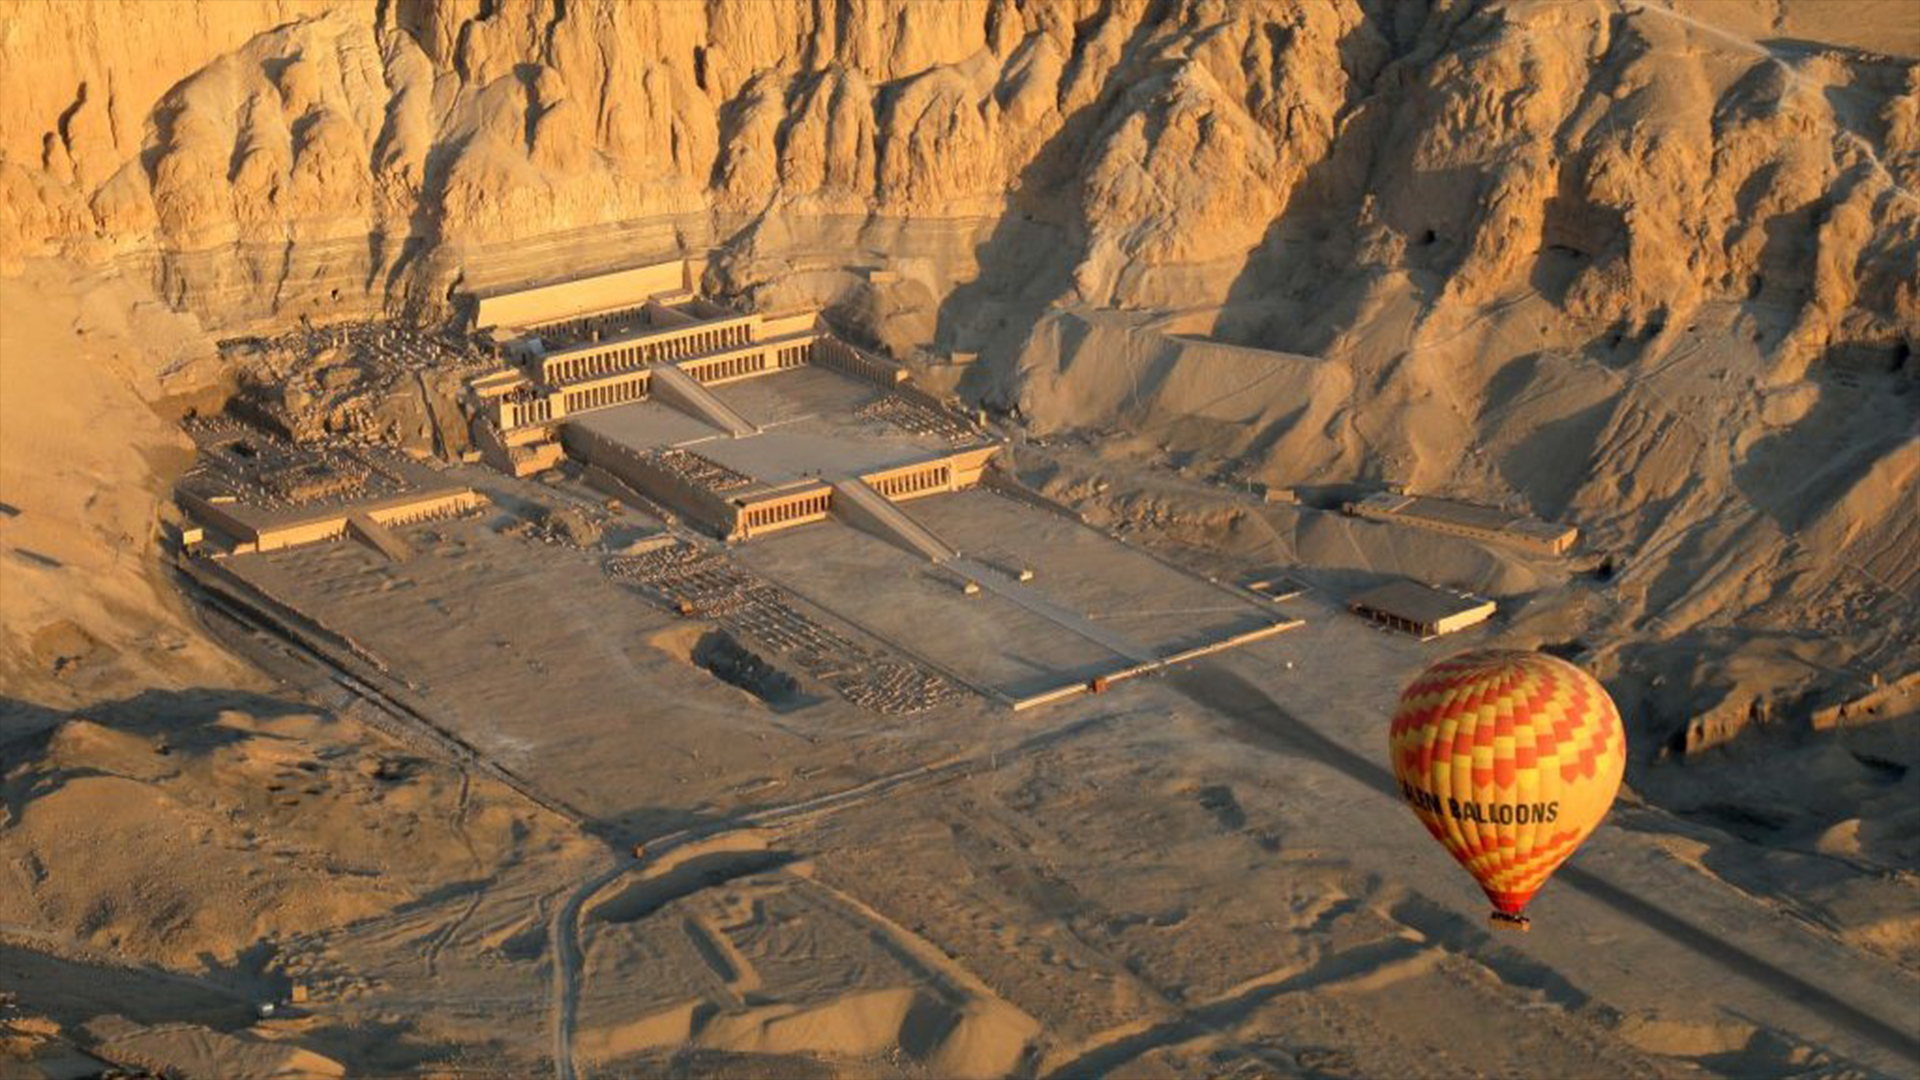 In 2027, a total solar eclipse will occur over the Temple of Hatshepsut in Luxor, Egypt.